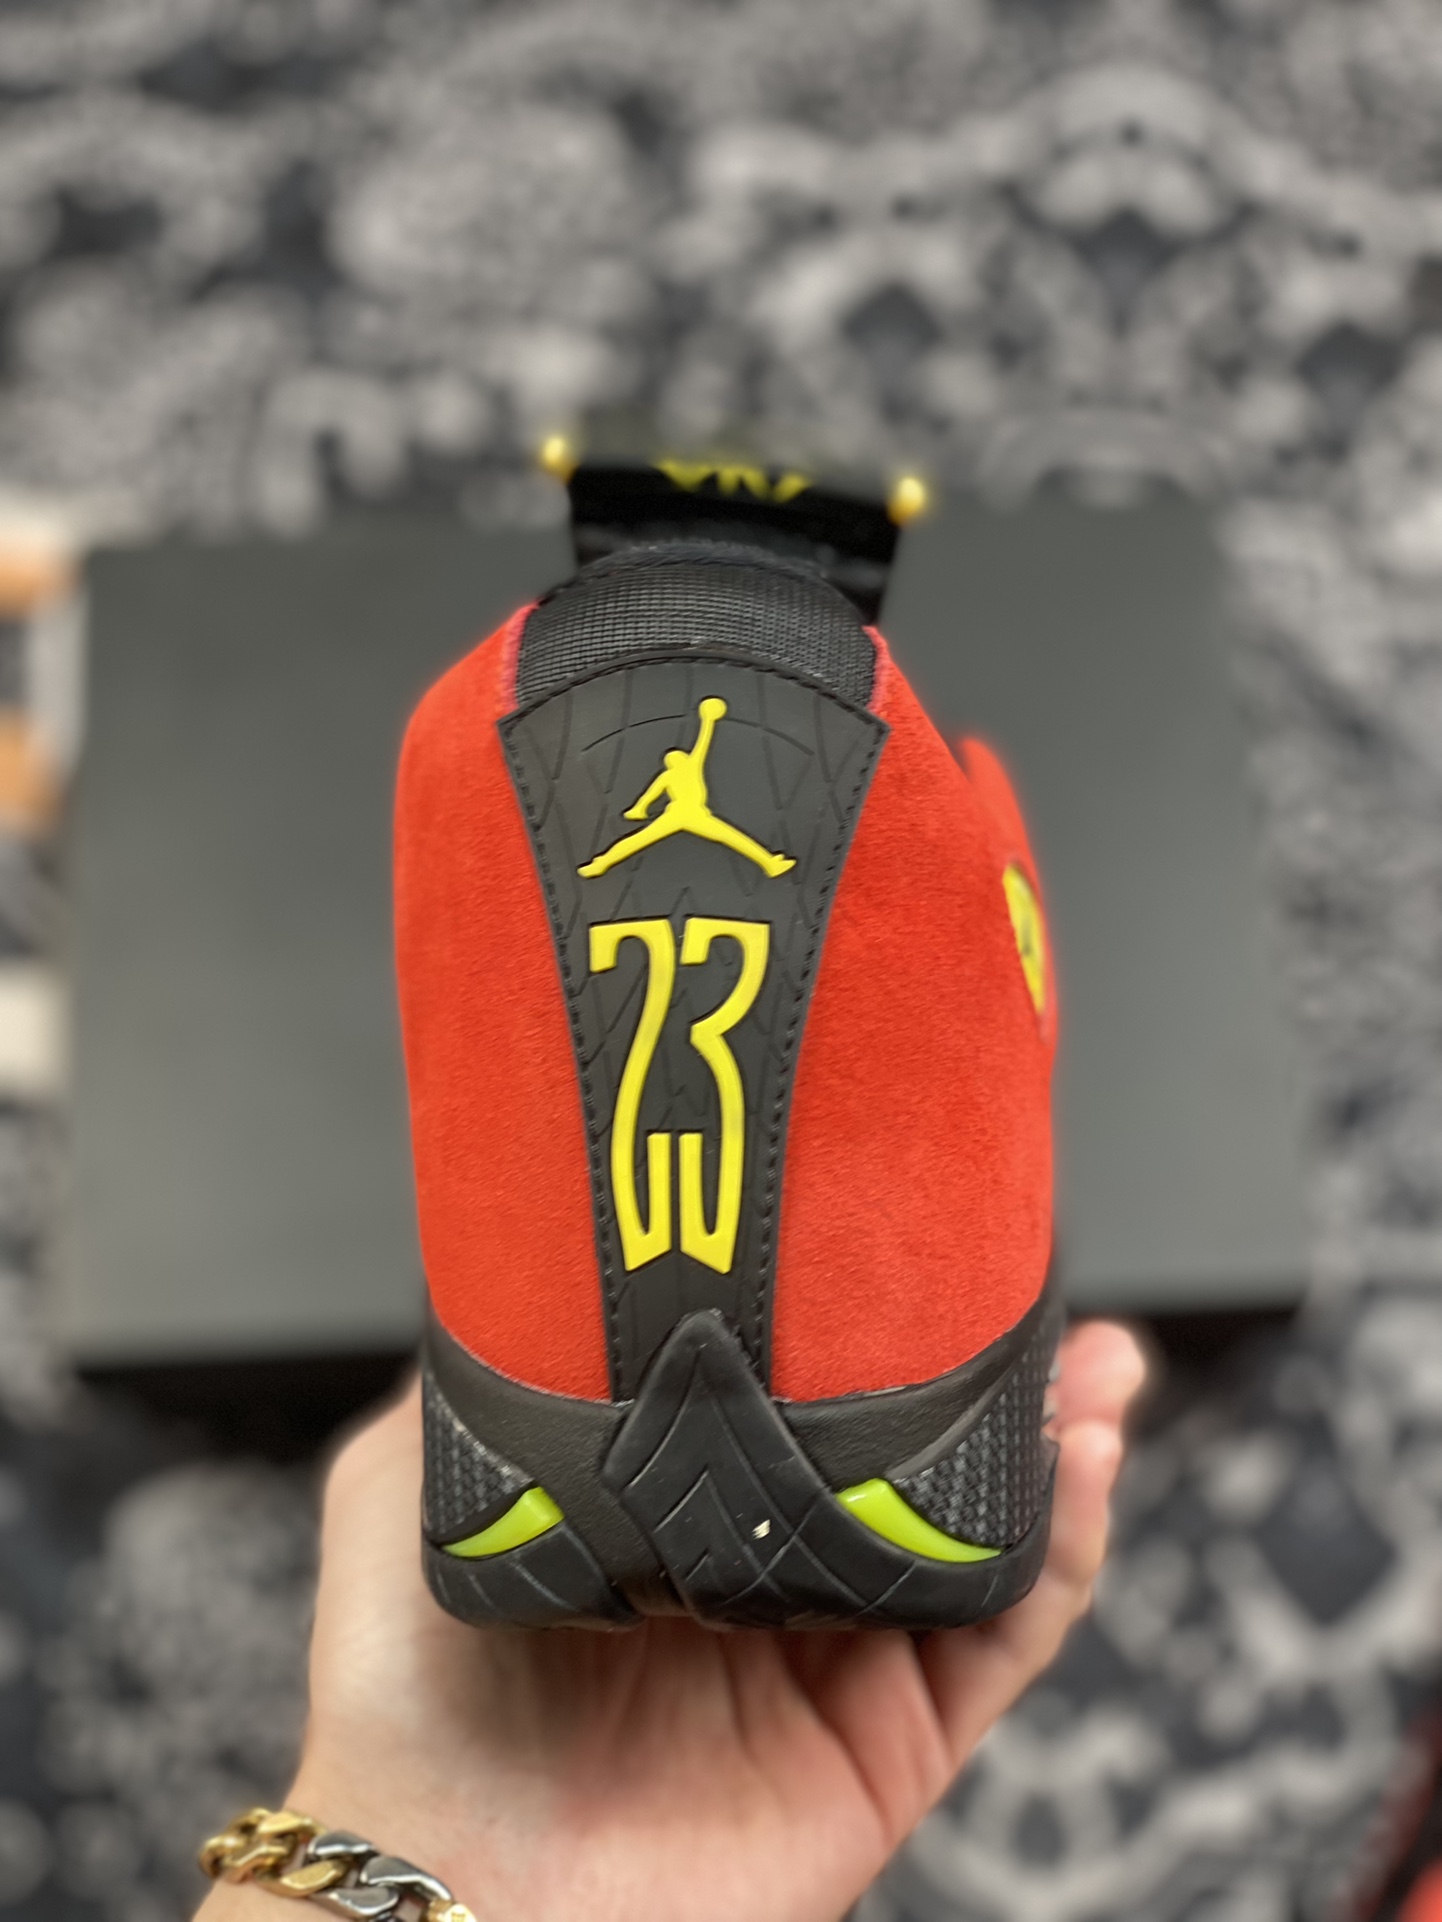 Nike Nike Air Jordan 14 Retro Ferrari  Size 14 Available For Immediate  Sale At Sotheby's